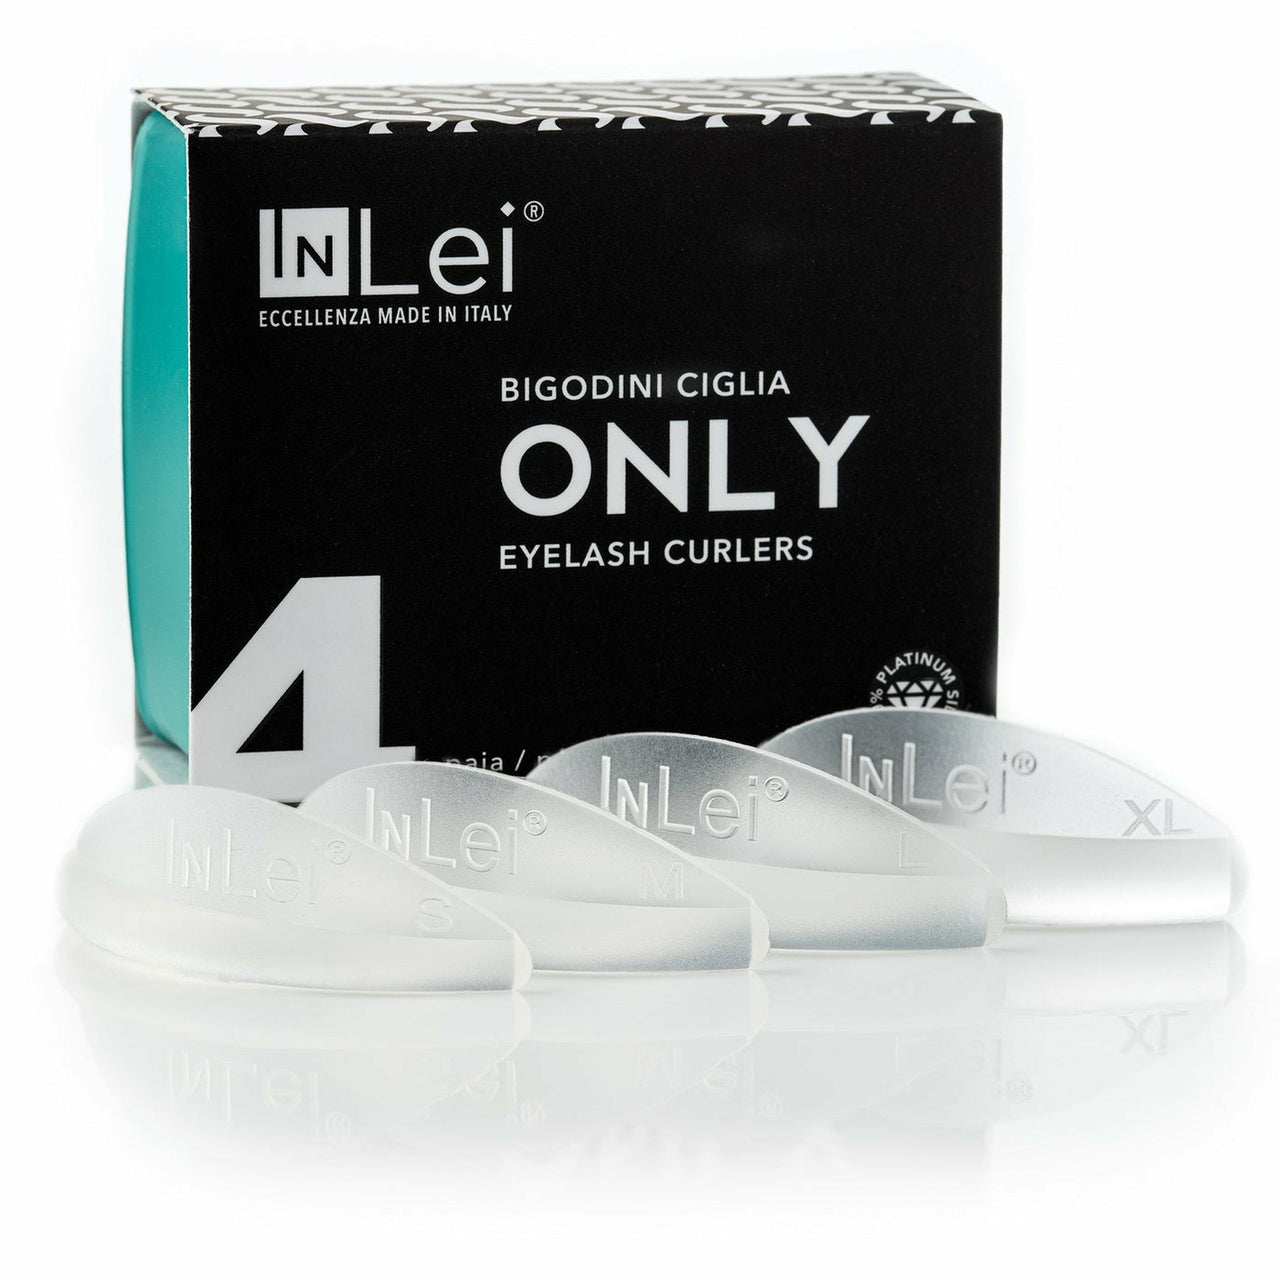 InLei® "ONLY" Silicone Shields Dolly Curl